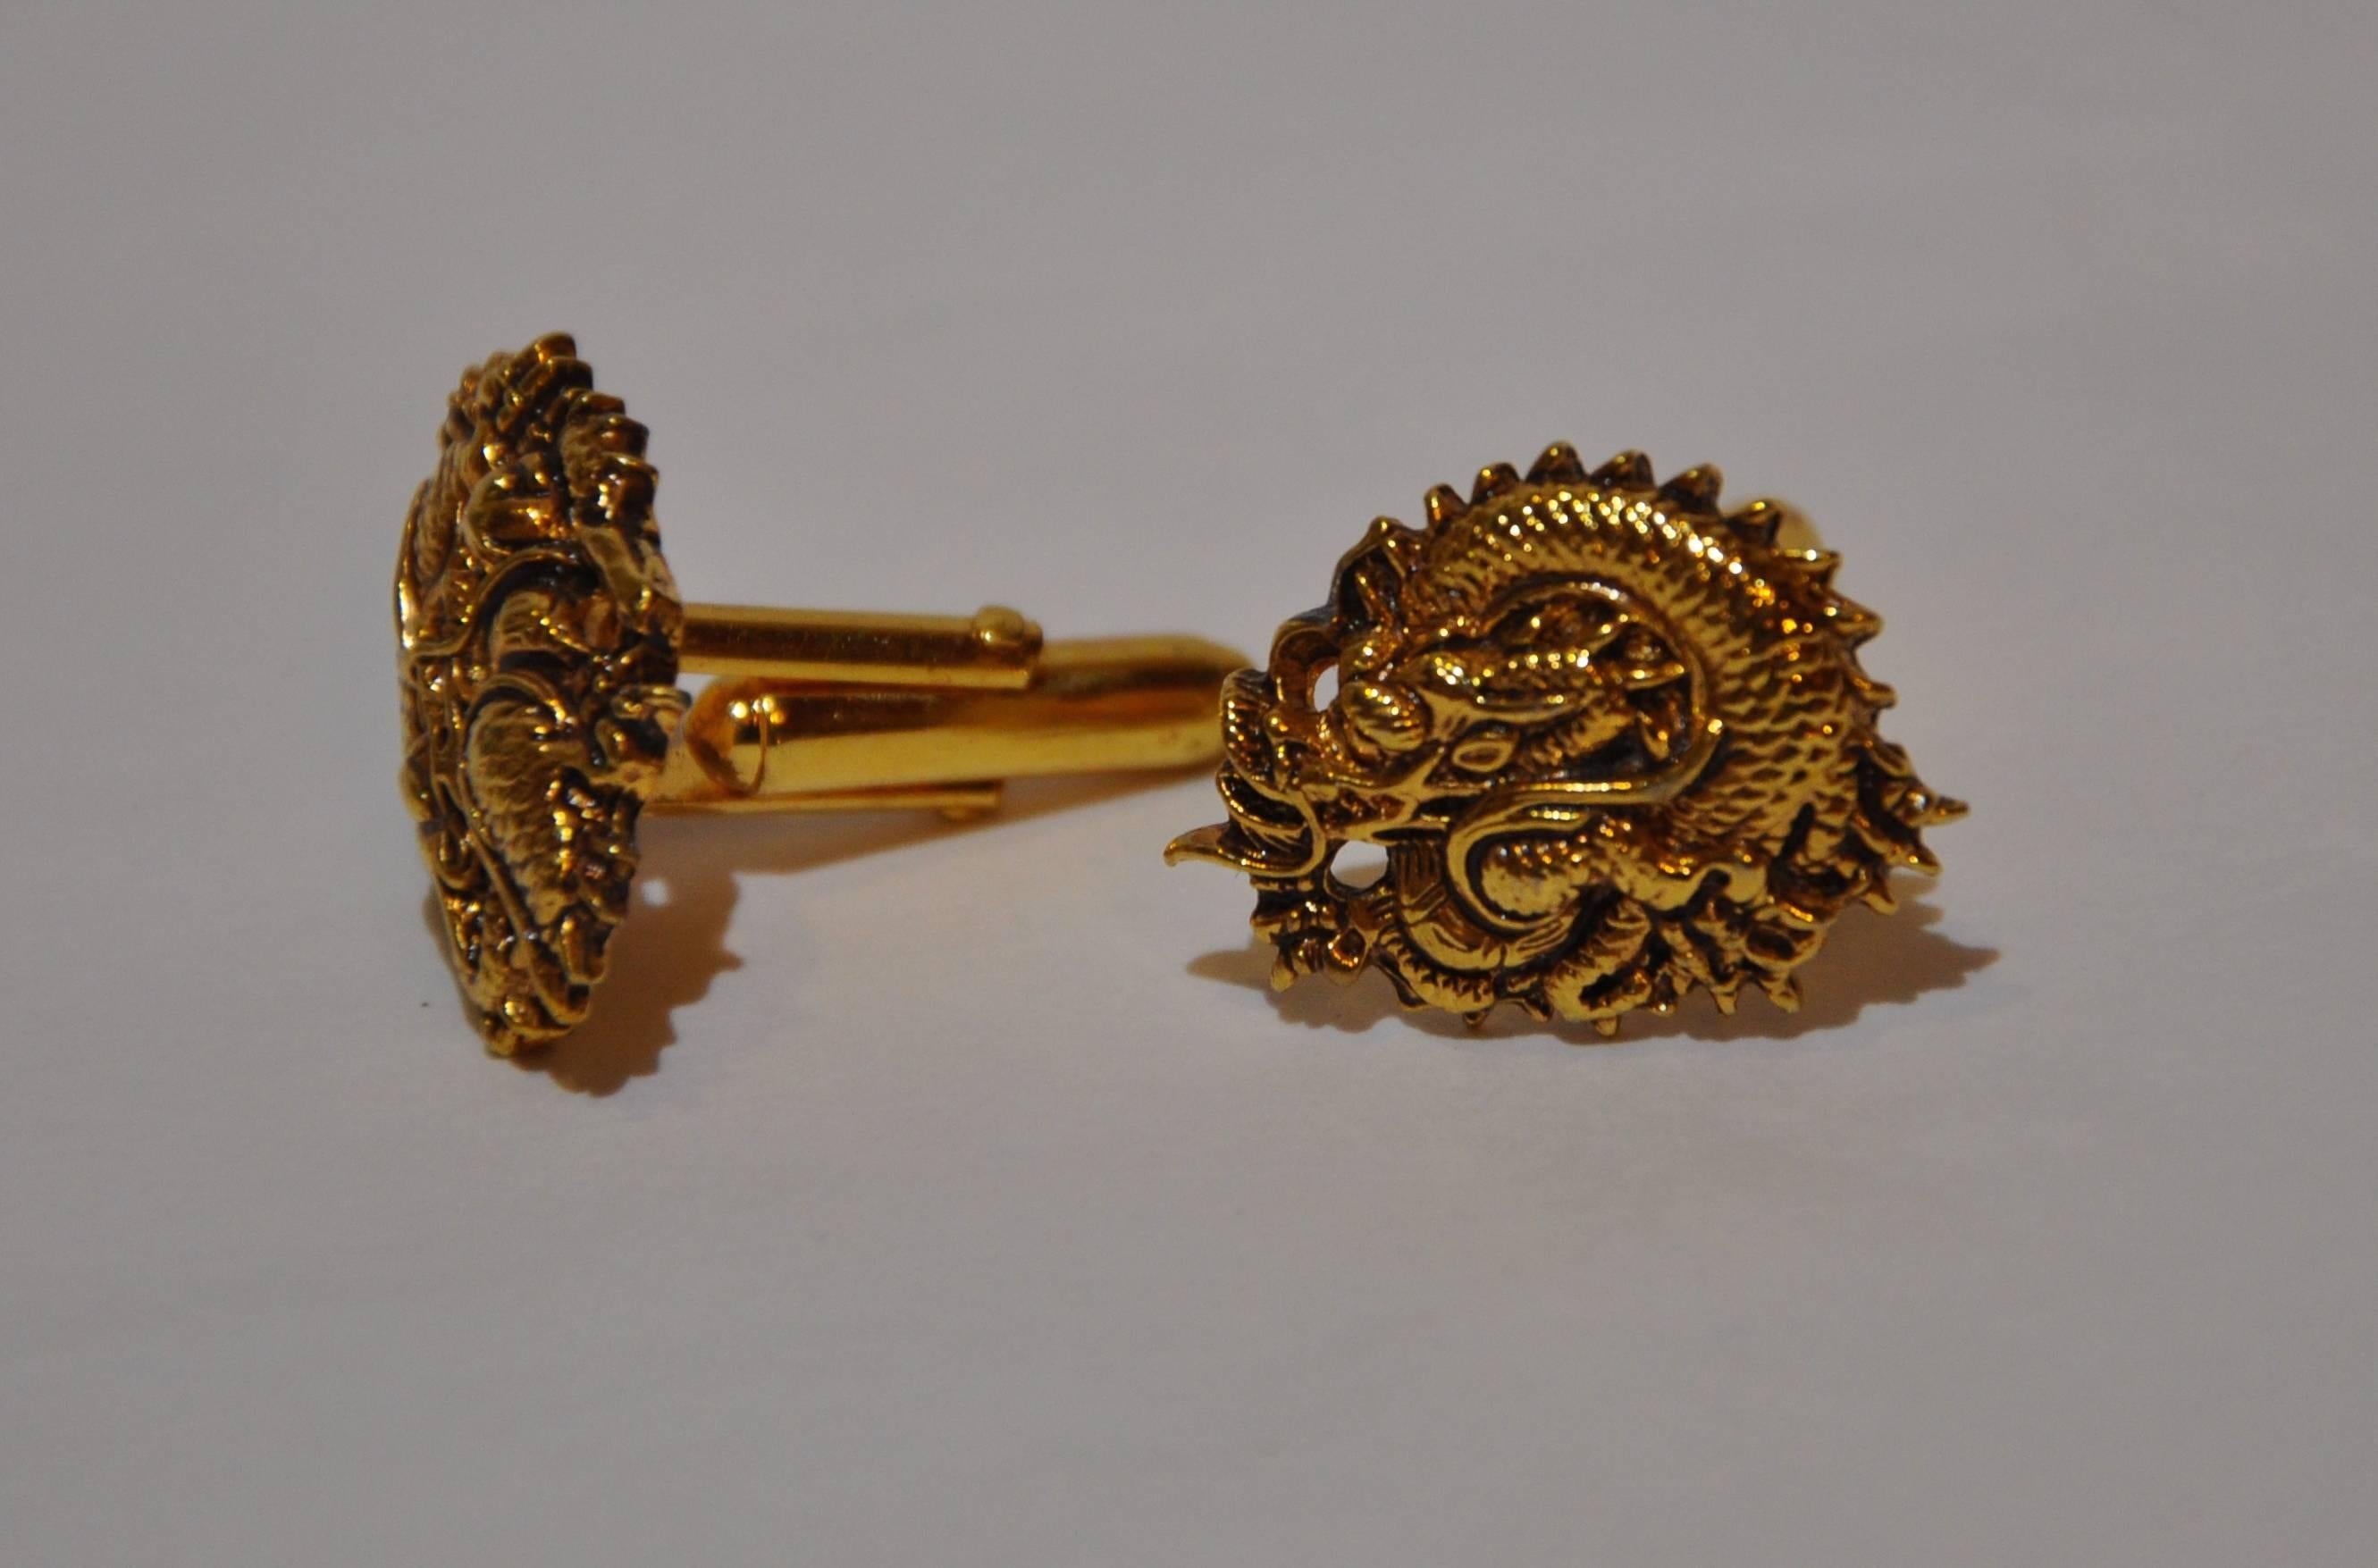        This wonderfully detailed etched cuff links in gilded gold vermeil hardware "Dragon" is etched with multi-textures. Width measures 1", length is 3/4", signed on the back.